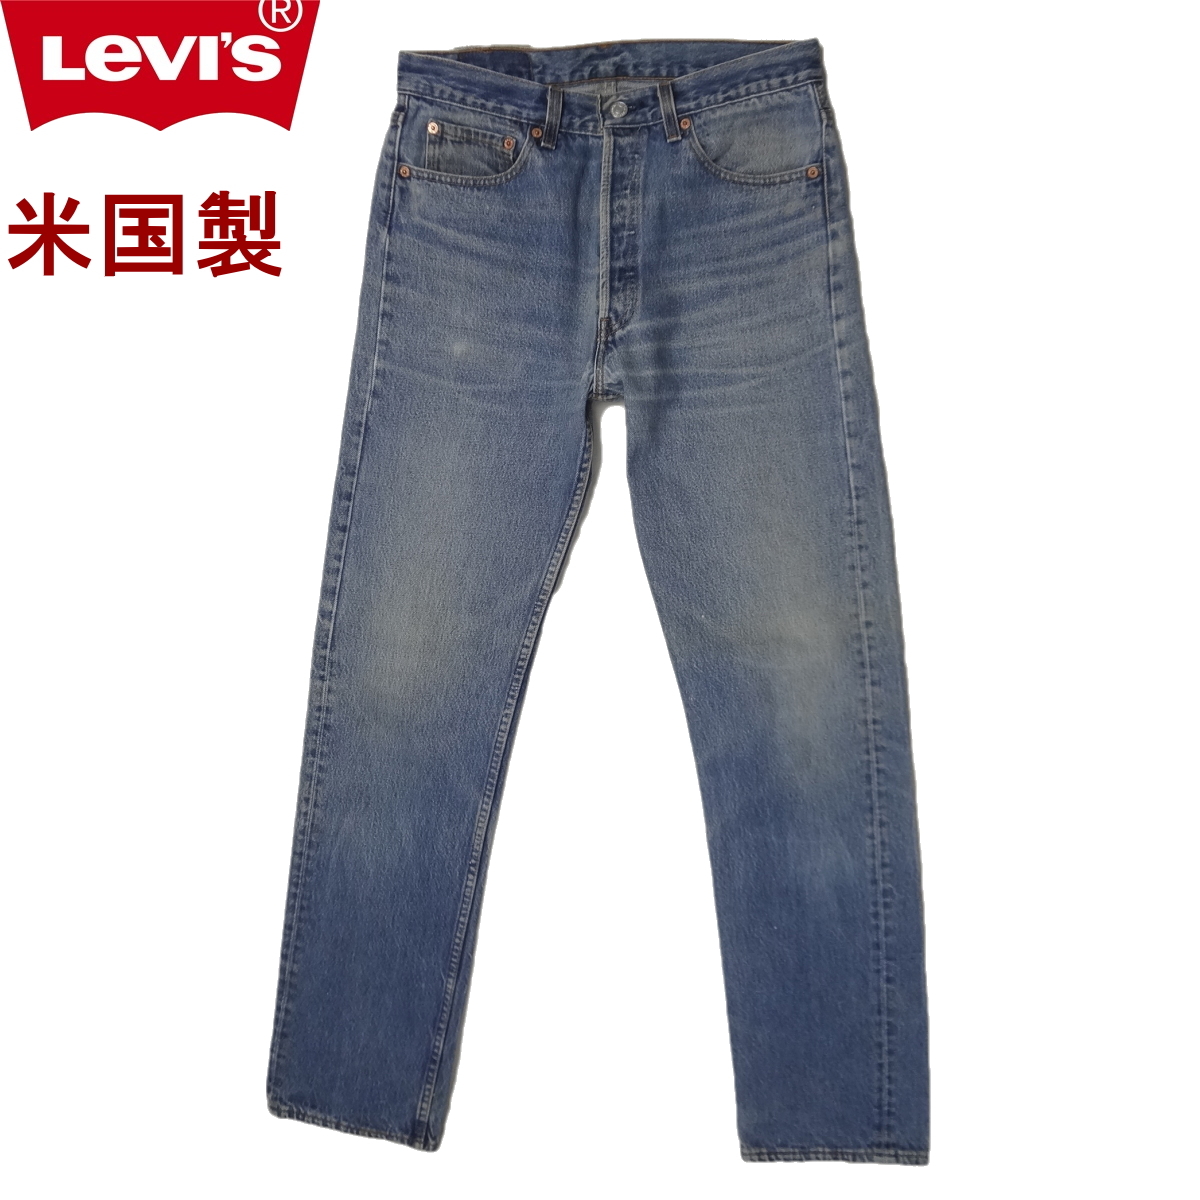 W33インチ リーバイス ジーンズ 501 米国製 ジーパン アメリカ製 古着 levi's MADE IN THE USA